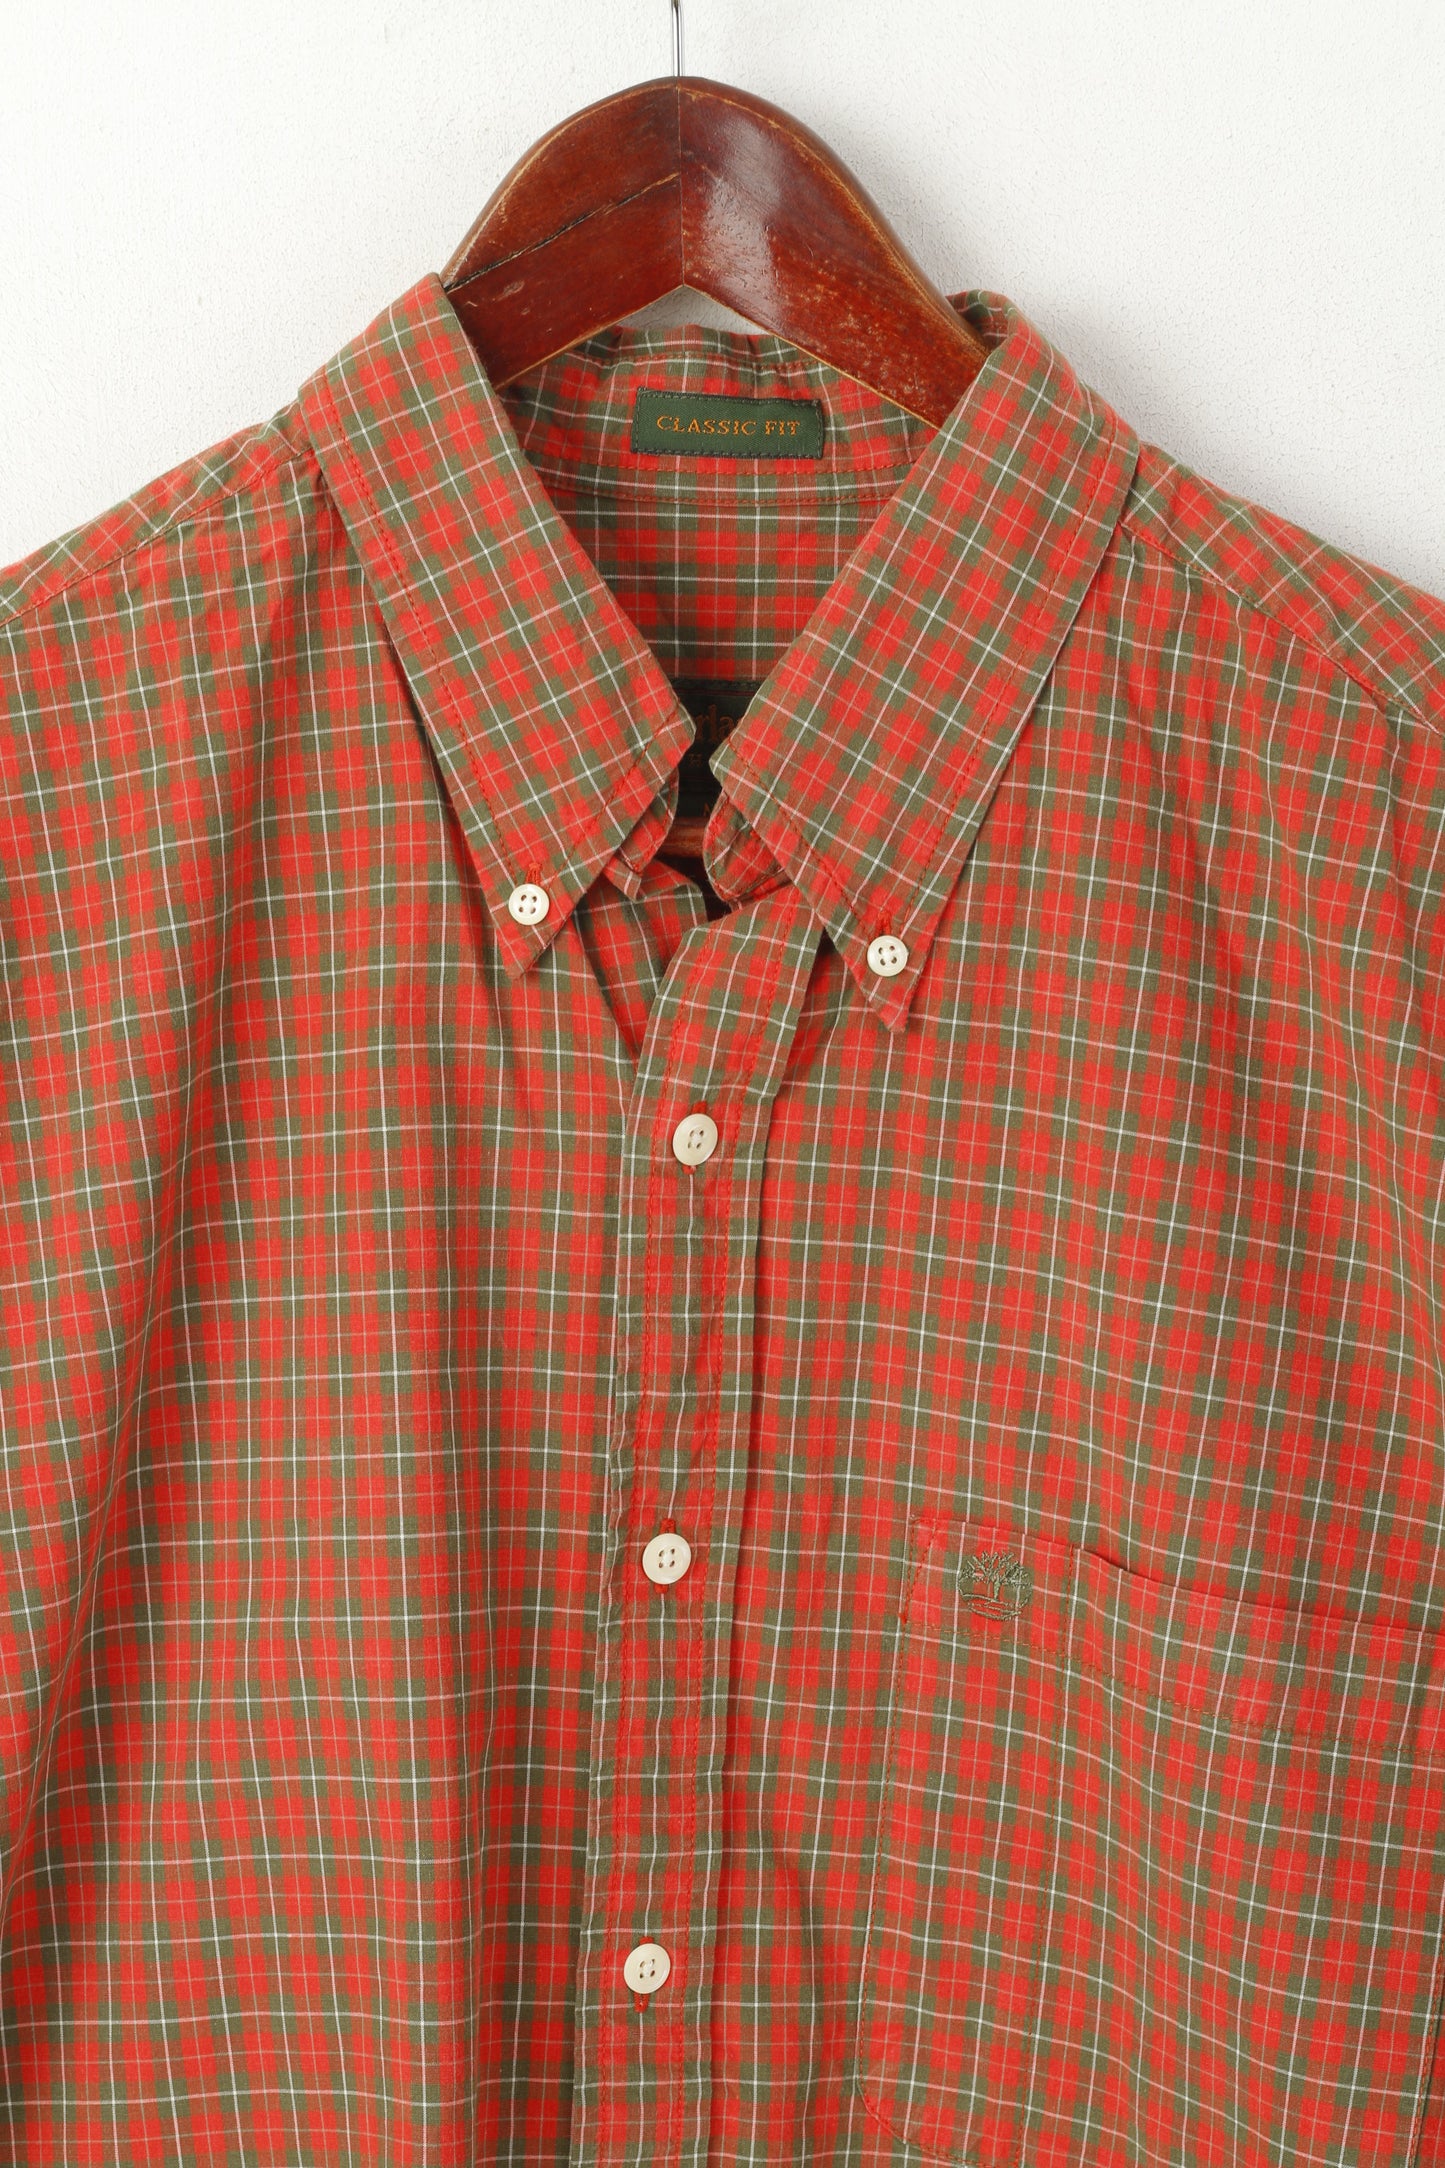 Timberland Men M (L) Casual Shirt Red Cotton Checkered Weatherwear Classic Fit Top